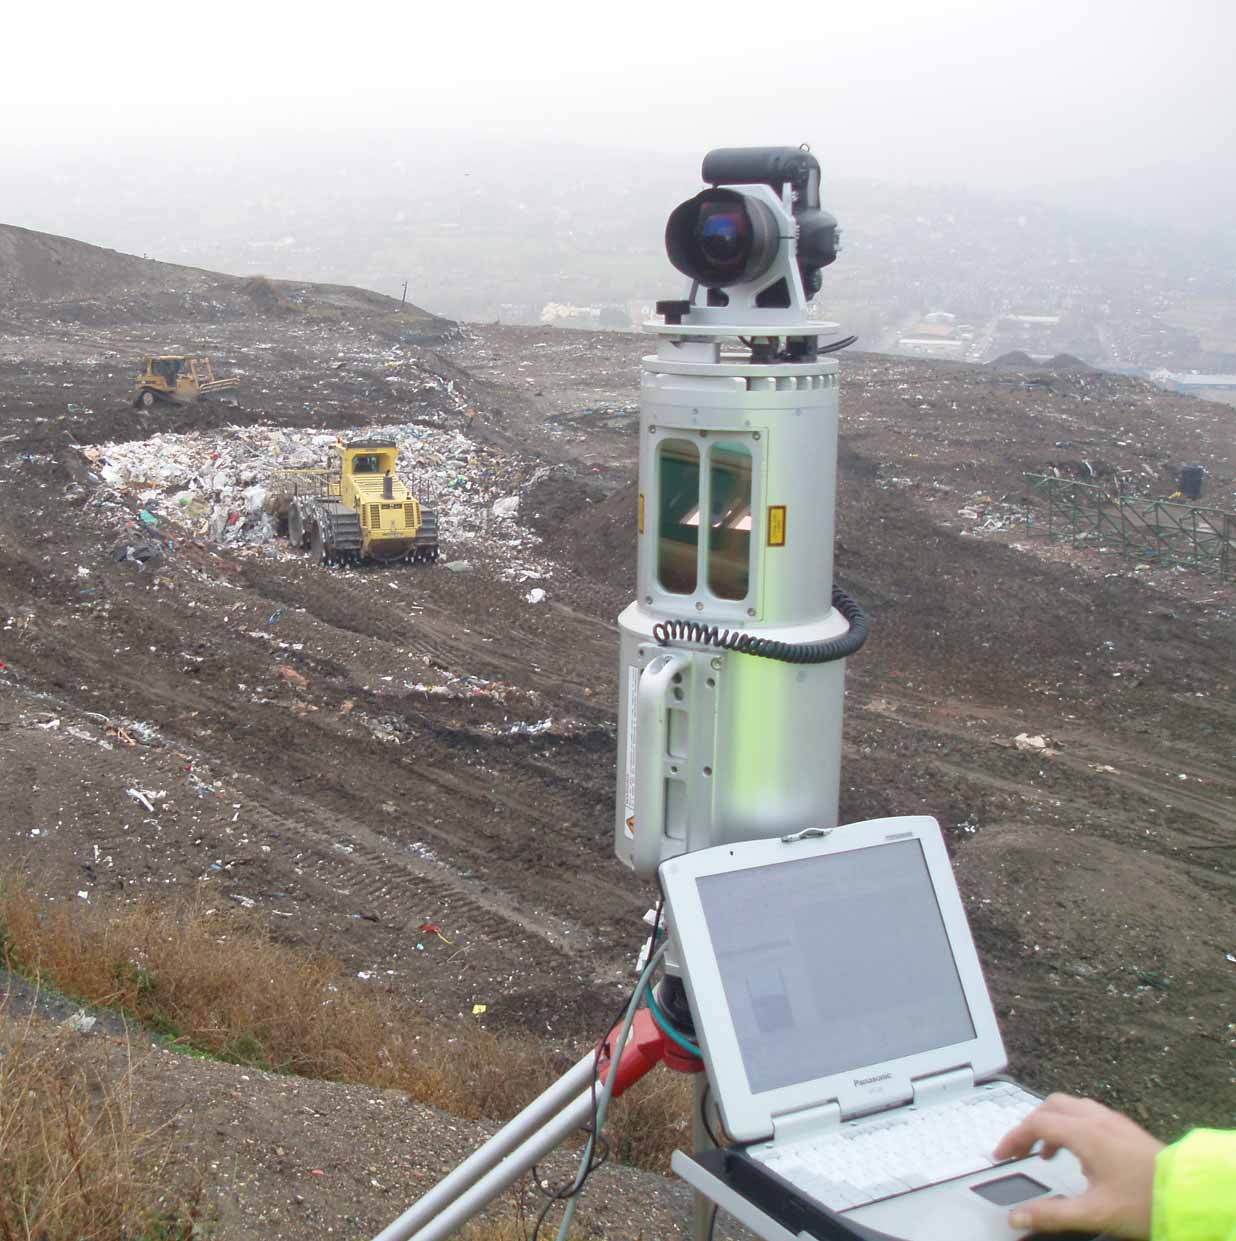 Laser scanner being remotely accessed with a laptop